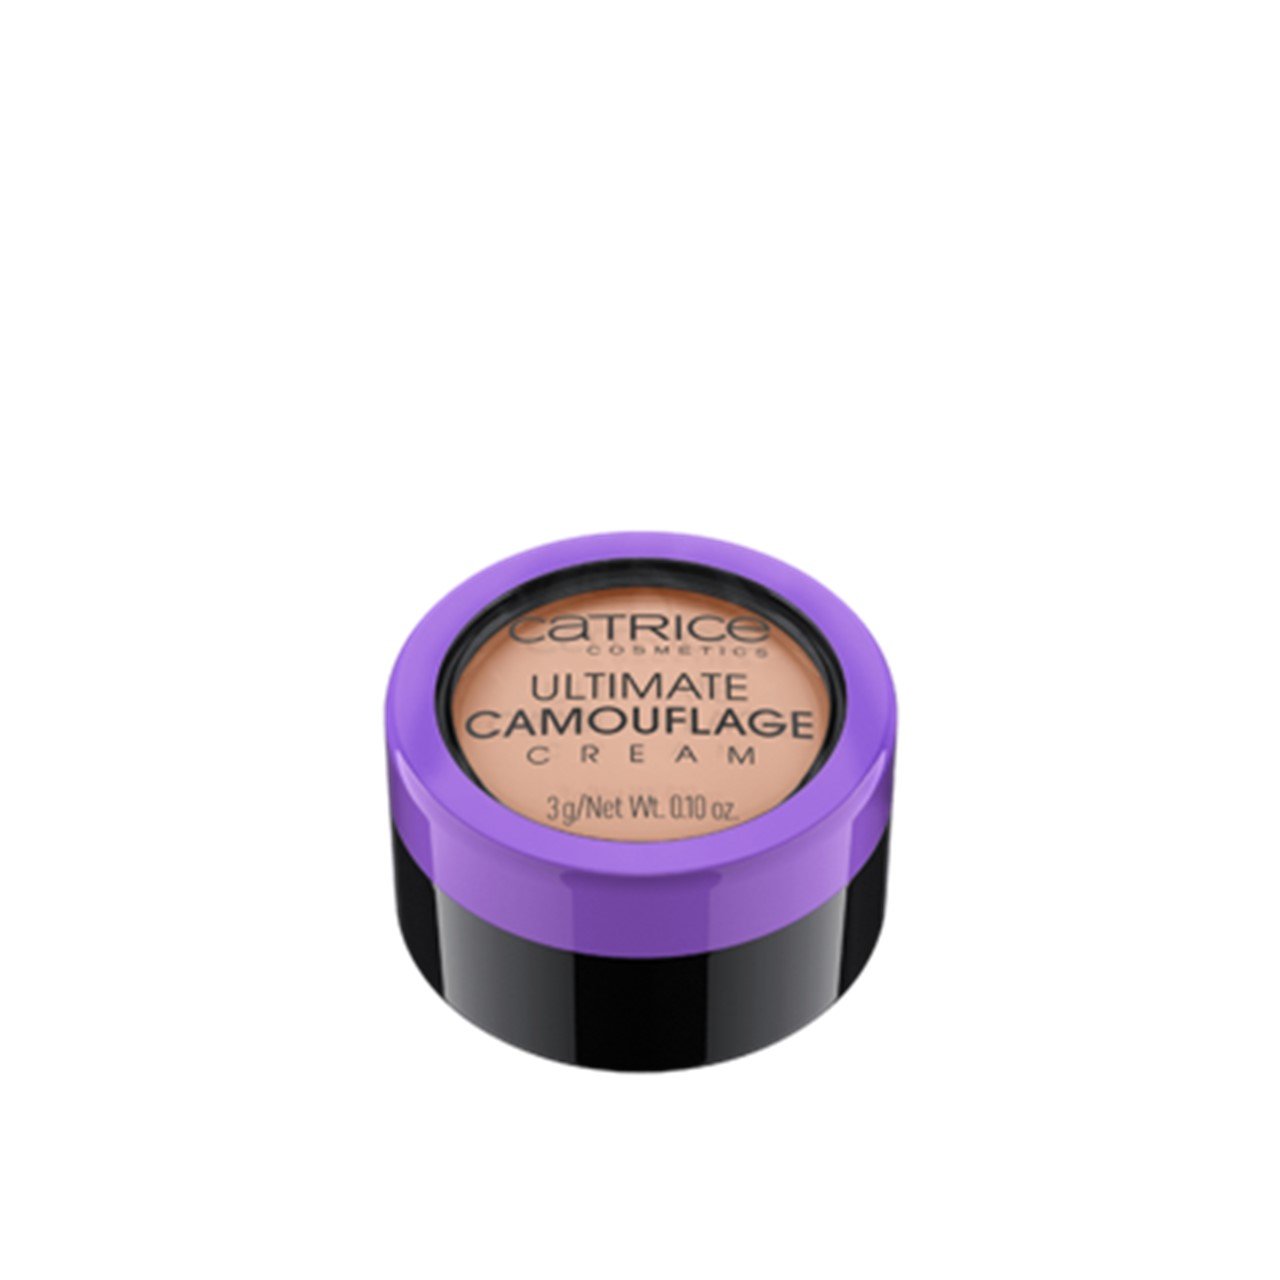 Catrice Ultimate Camouflage Cream 020 N Light Beige 3g (0.11oz)